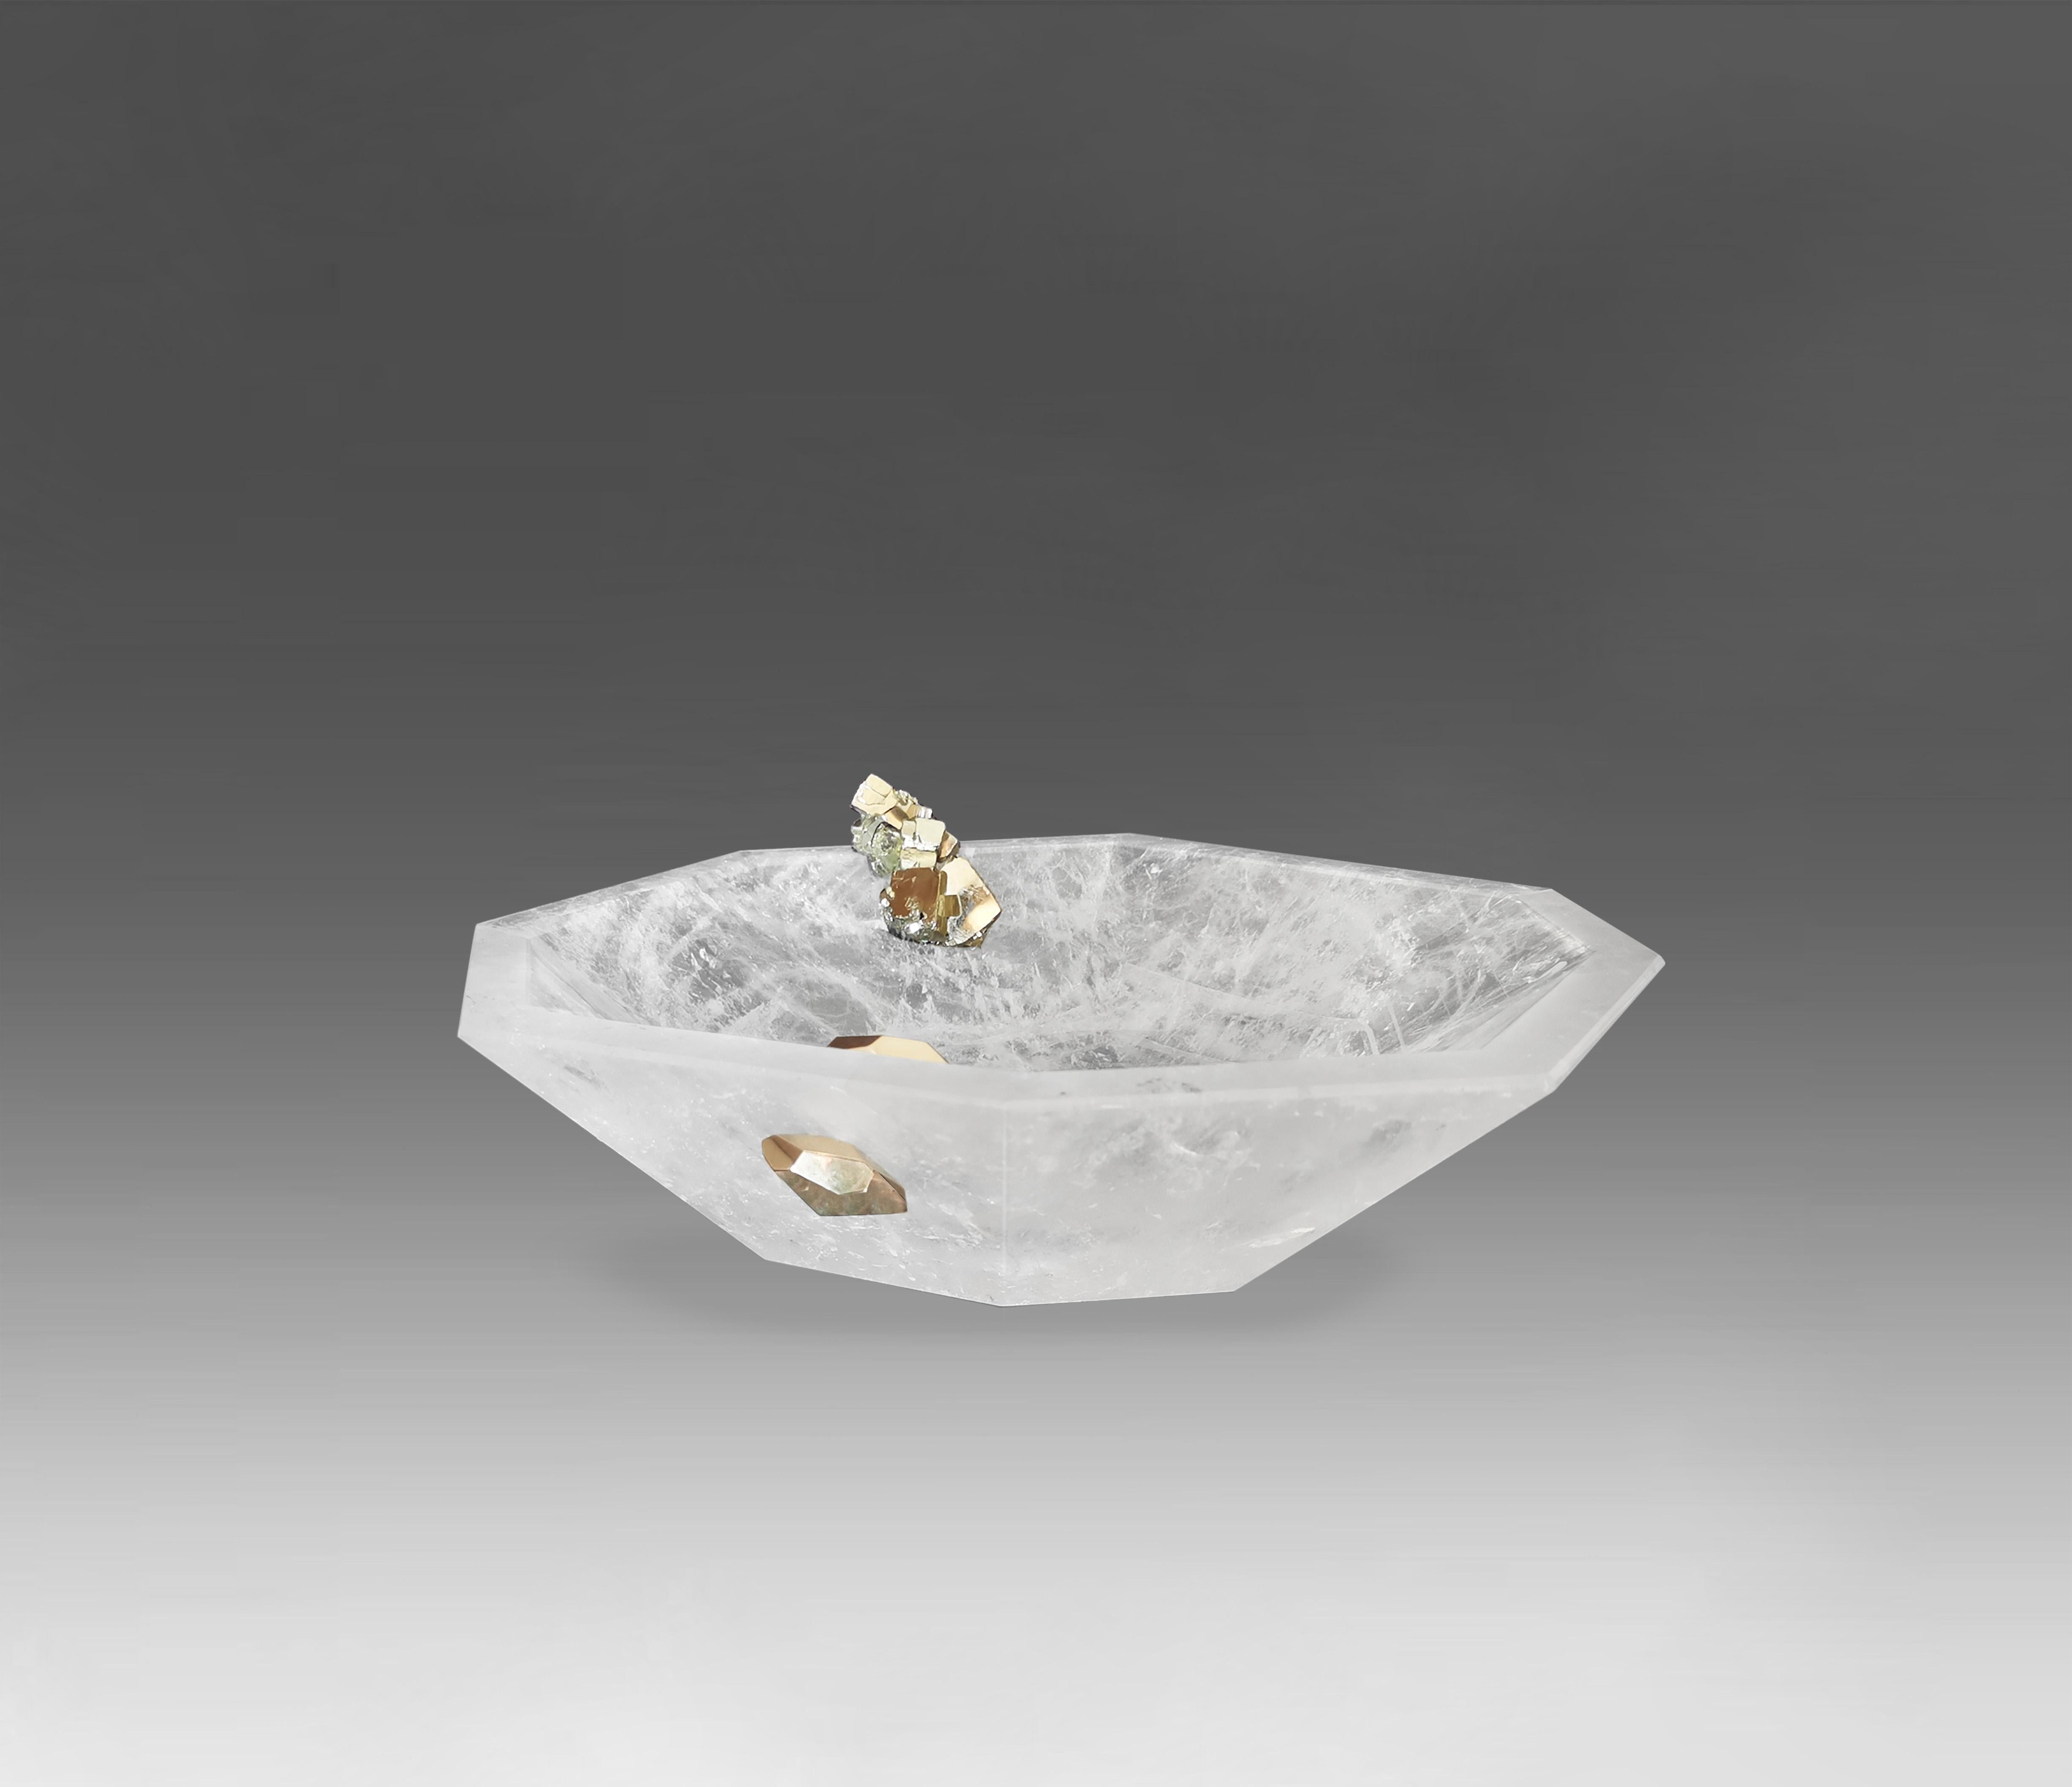 Carved diamond form rock crystal centerpiece with gemstone decoration. Created by Phoenix Gallery.